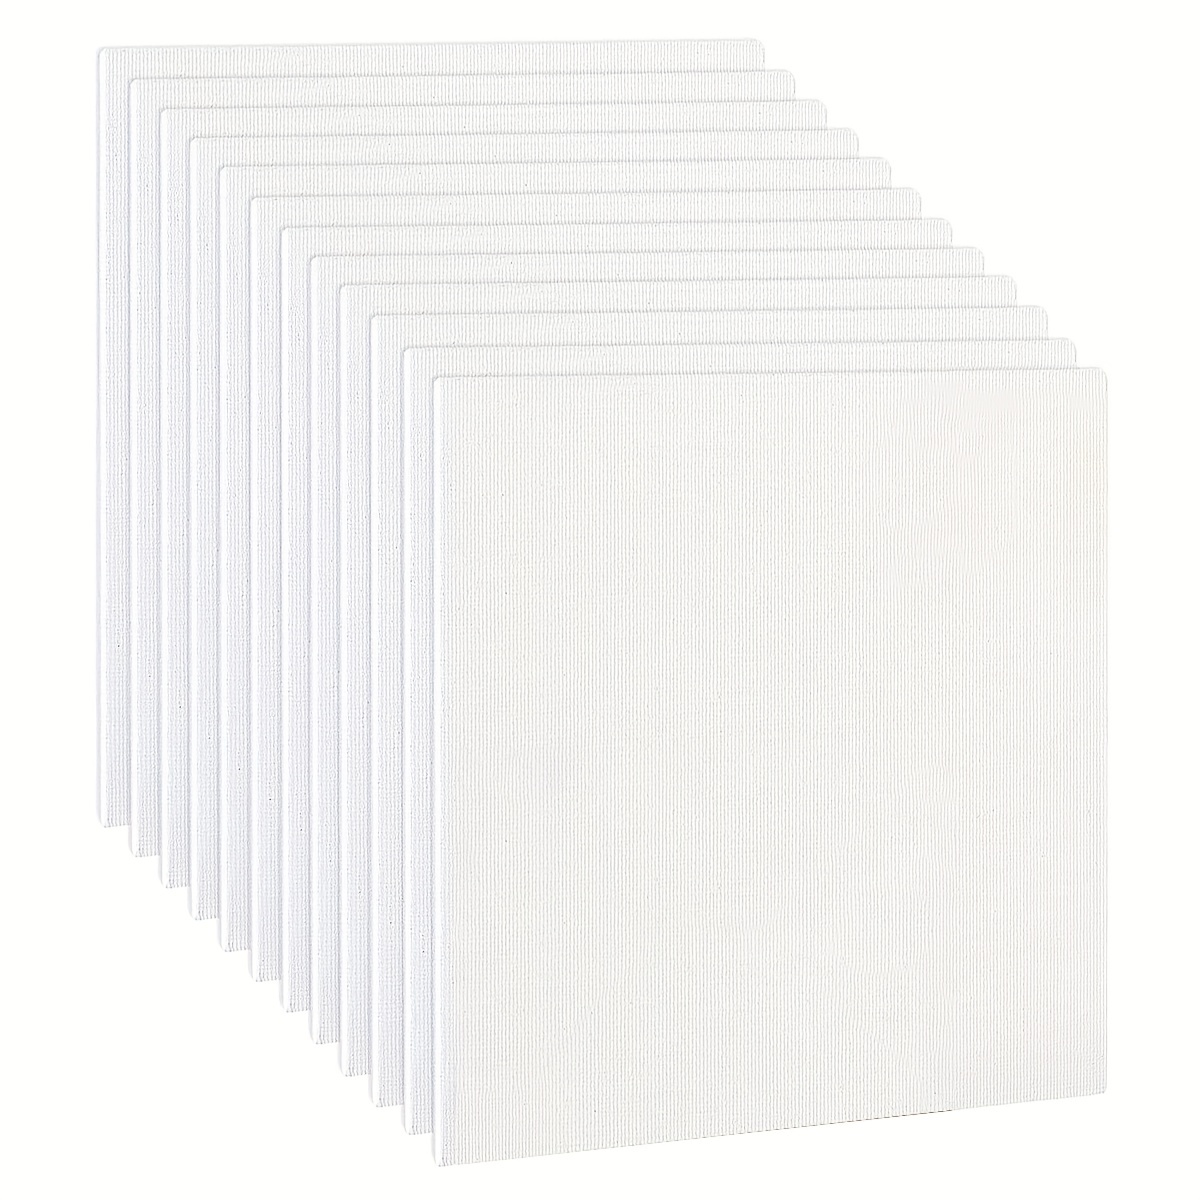 20 Pack Black Canvas Boards for Painting 5x7 Blank Small Art